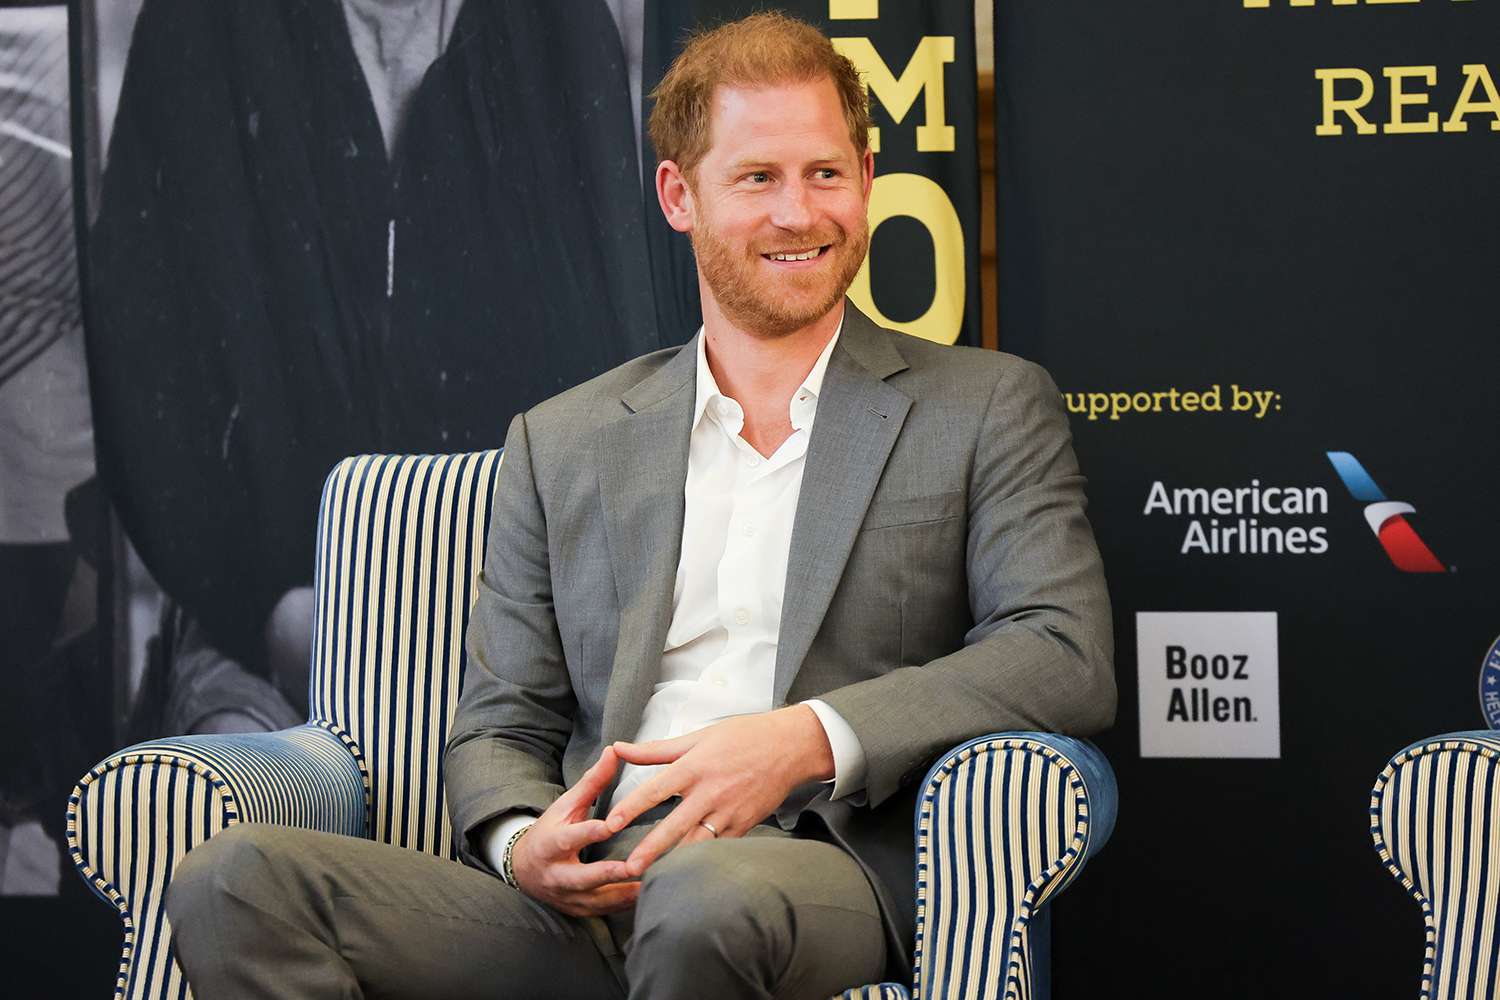 Prince Harry Makes First Appearance of U.K. Visit to Celebrate Invictus Games Anniversary